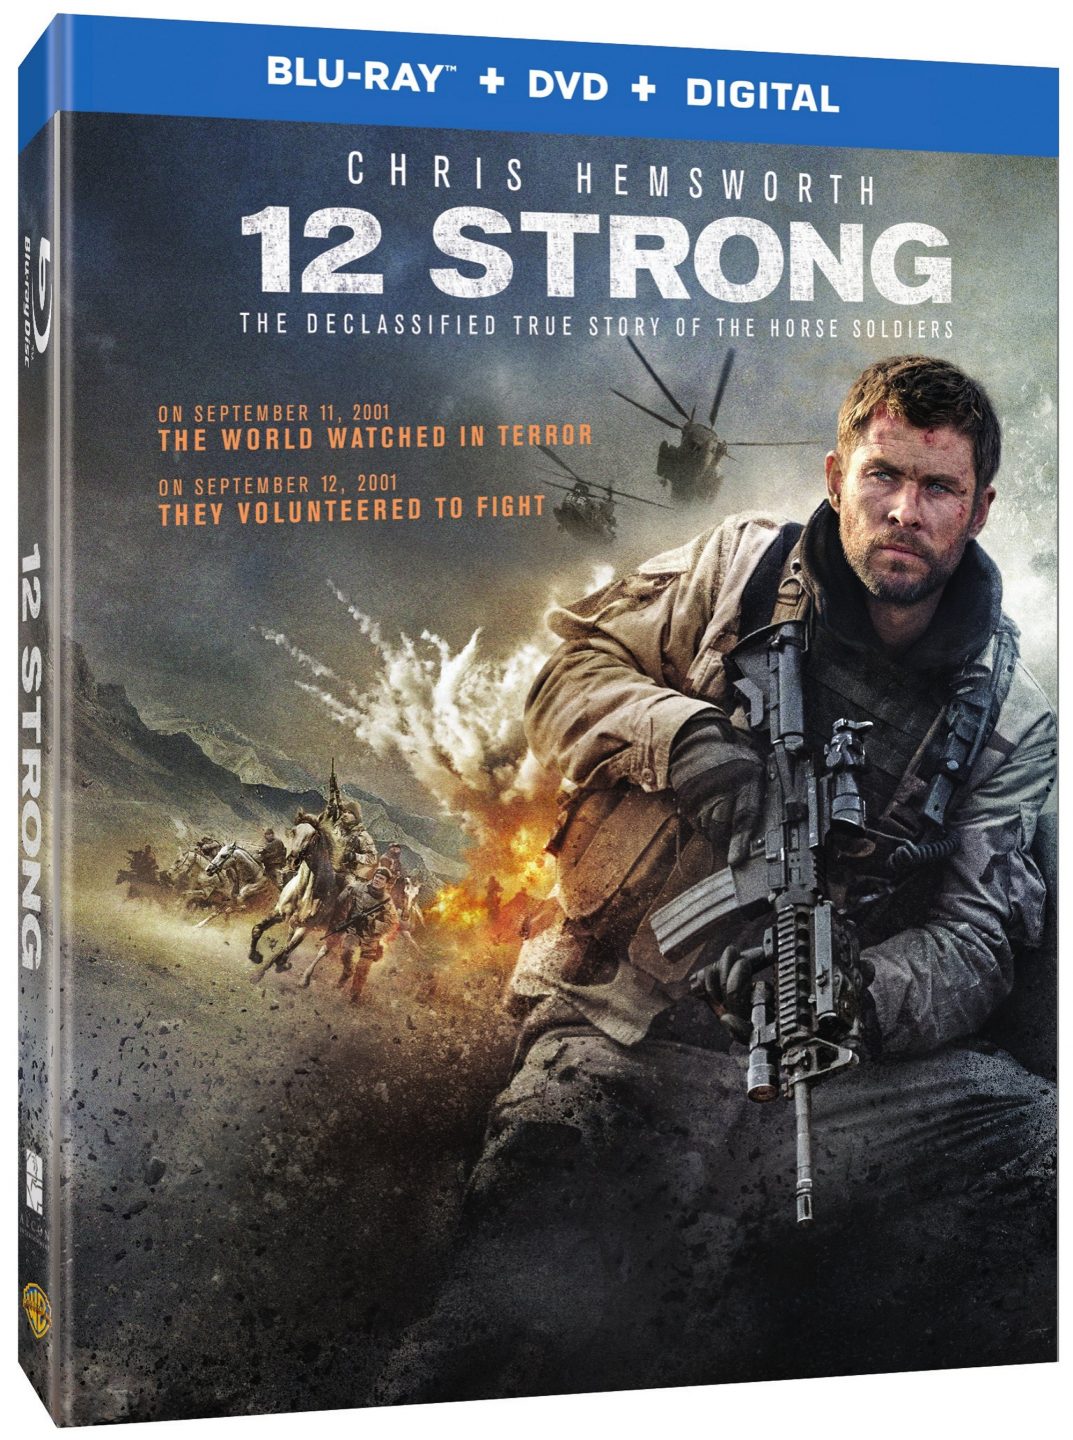 12 Strong Blu-Ray Combo Pack cover (Warner Bros. Home Entertainment)